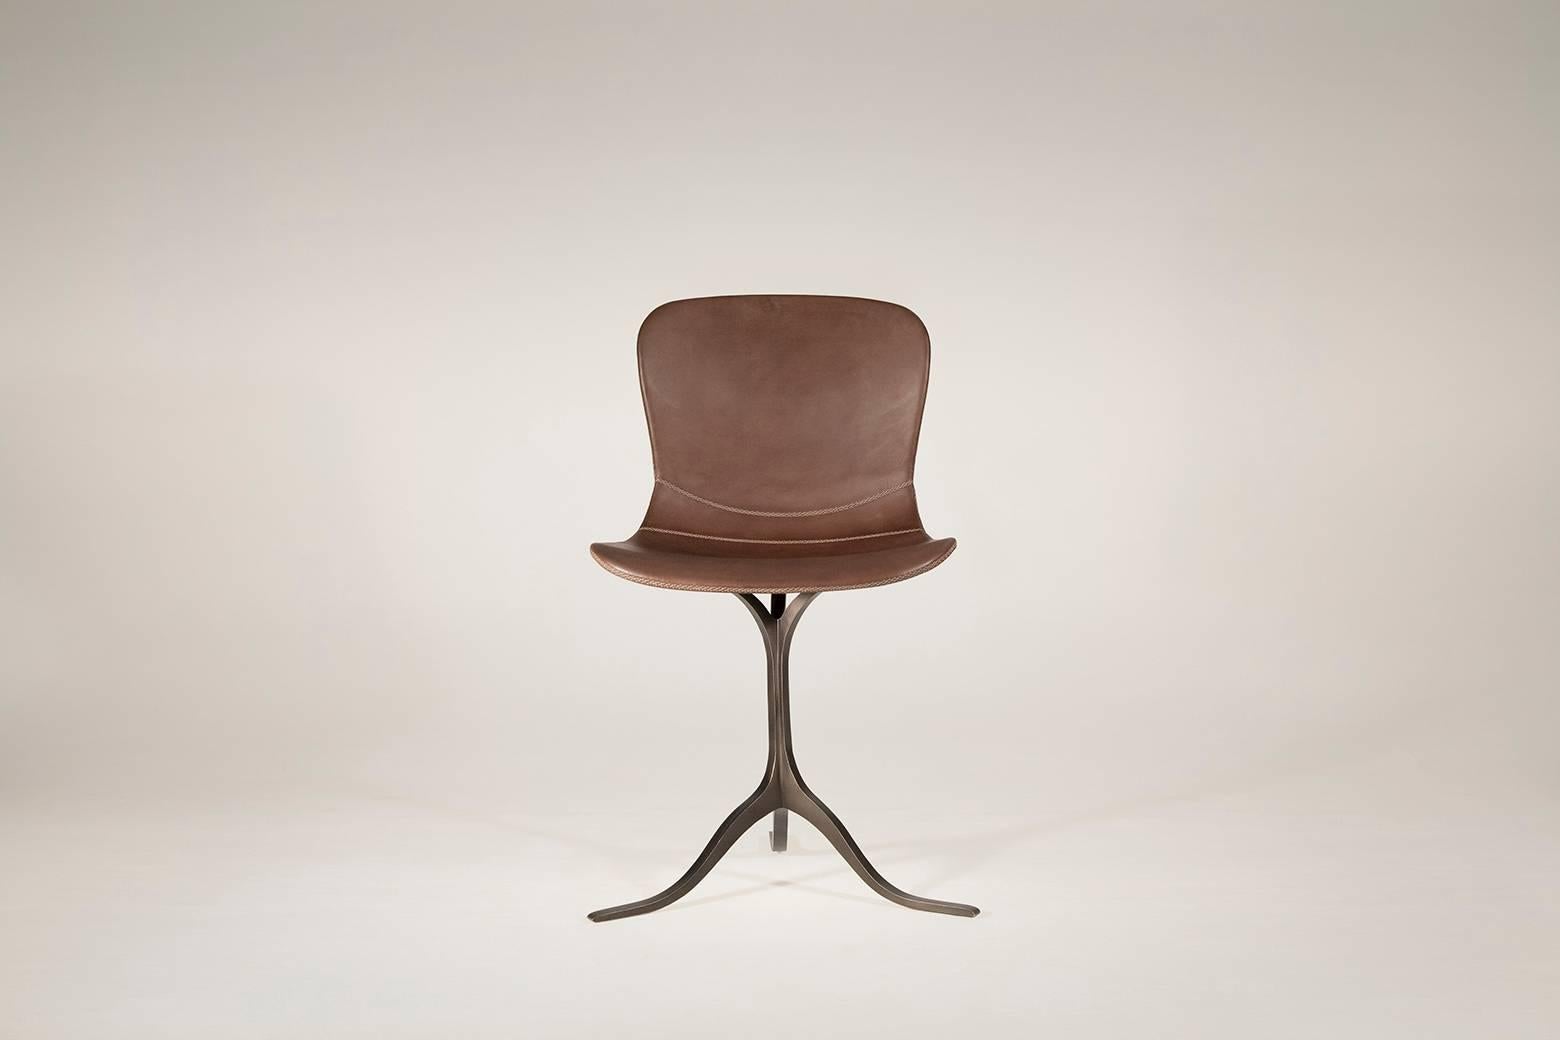 Model: PT40-DB-truffe
Seat: Leather
Seat color: DB-truffe
Base: PT40, sand cast brass
Base finish: Brushed charcoal
Dimensions: 52 x 50 x 78 cm; Seat height 46 cm
(W x D x H) 18.1 x 19.6 x 30.71 inch; Seat height 18.1 inch 

This is a version pf our